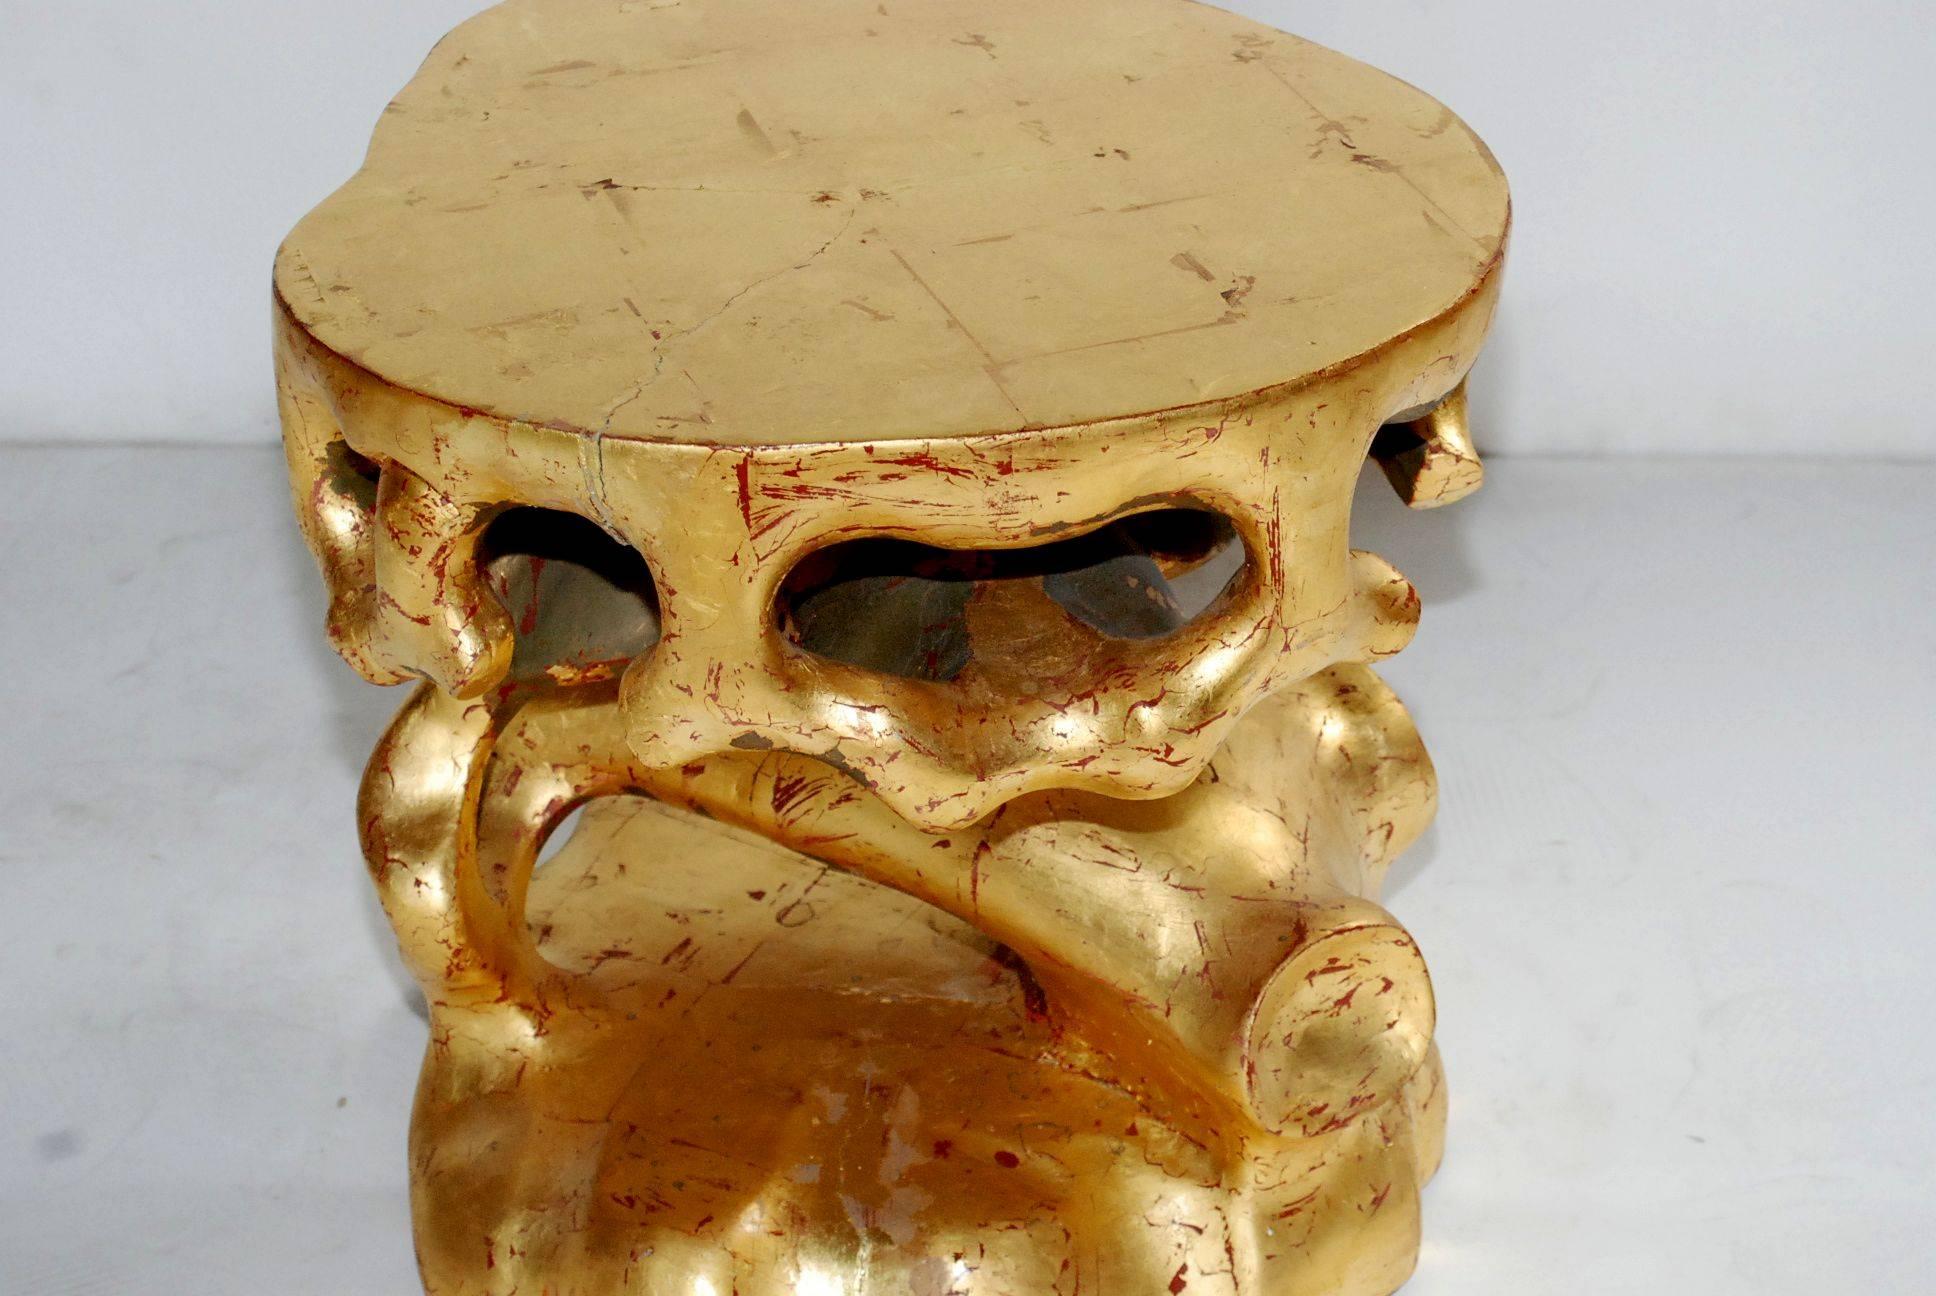 Pair of resin side tables cover with gold leaf.